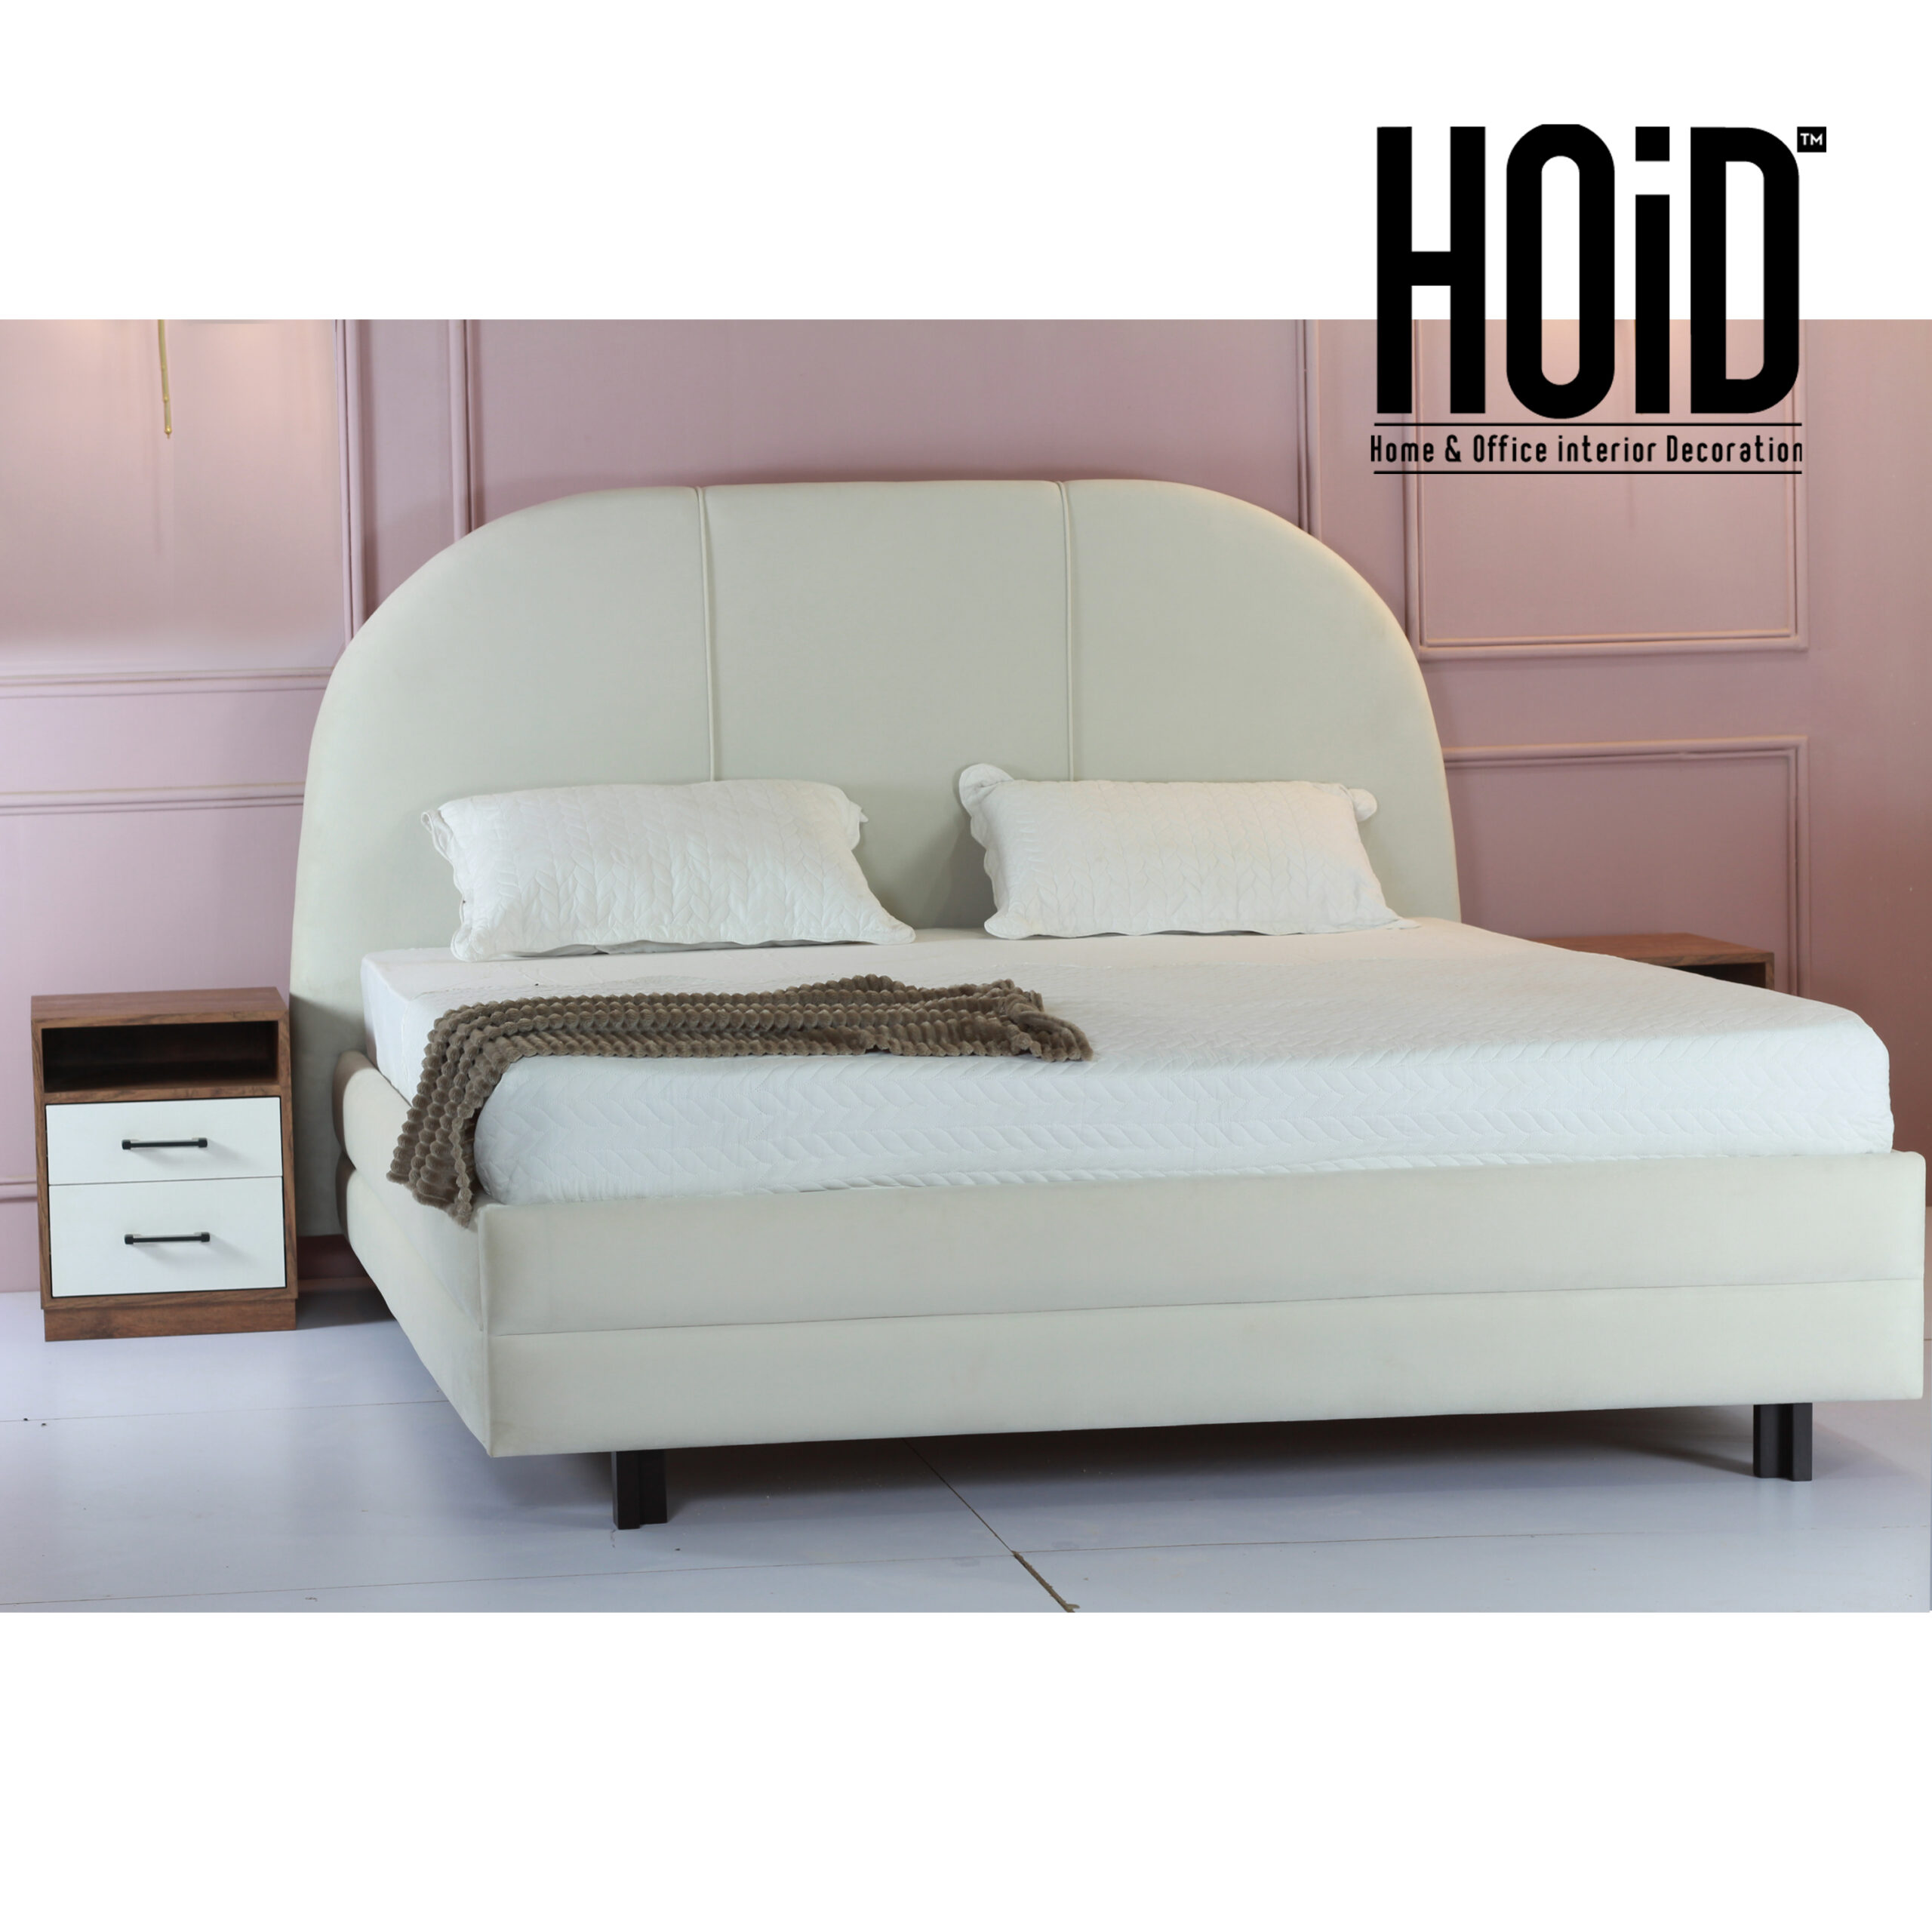 wok bed with shu side table